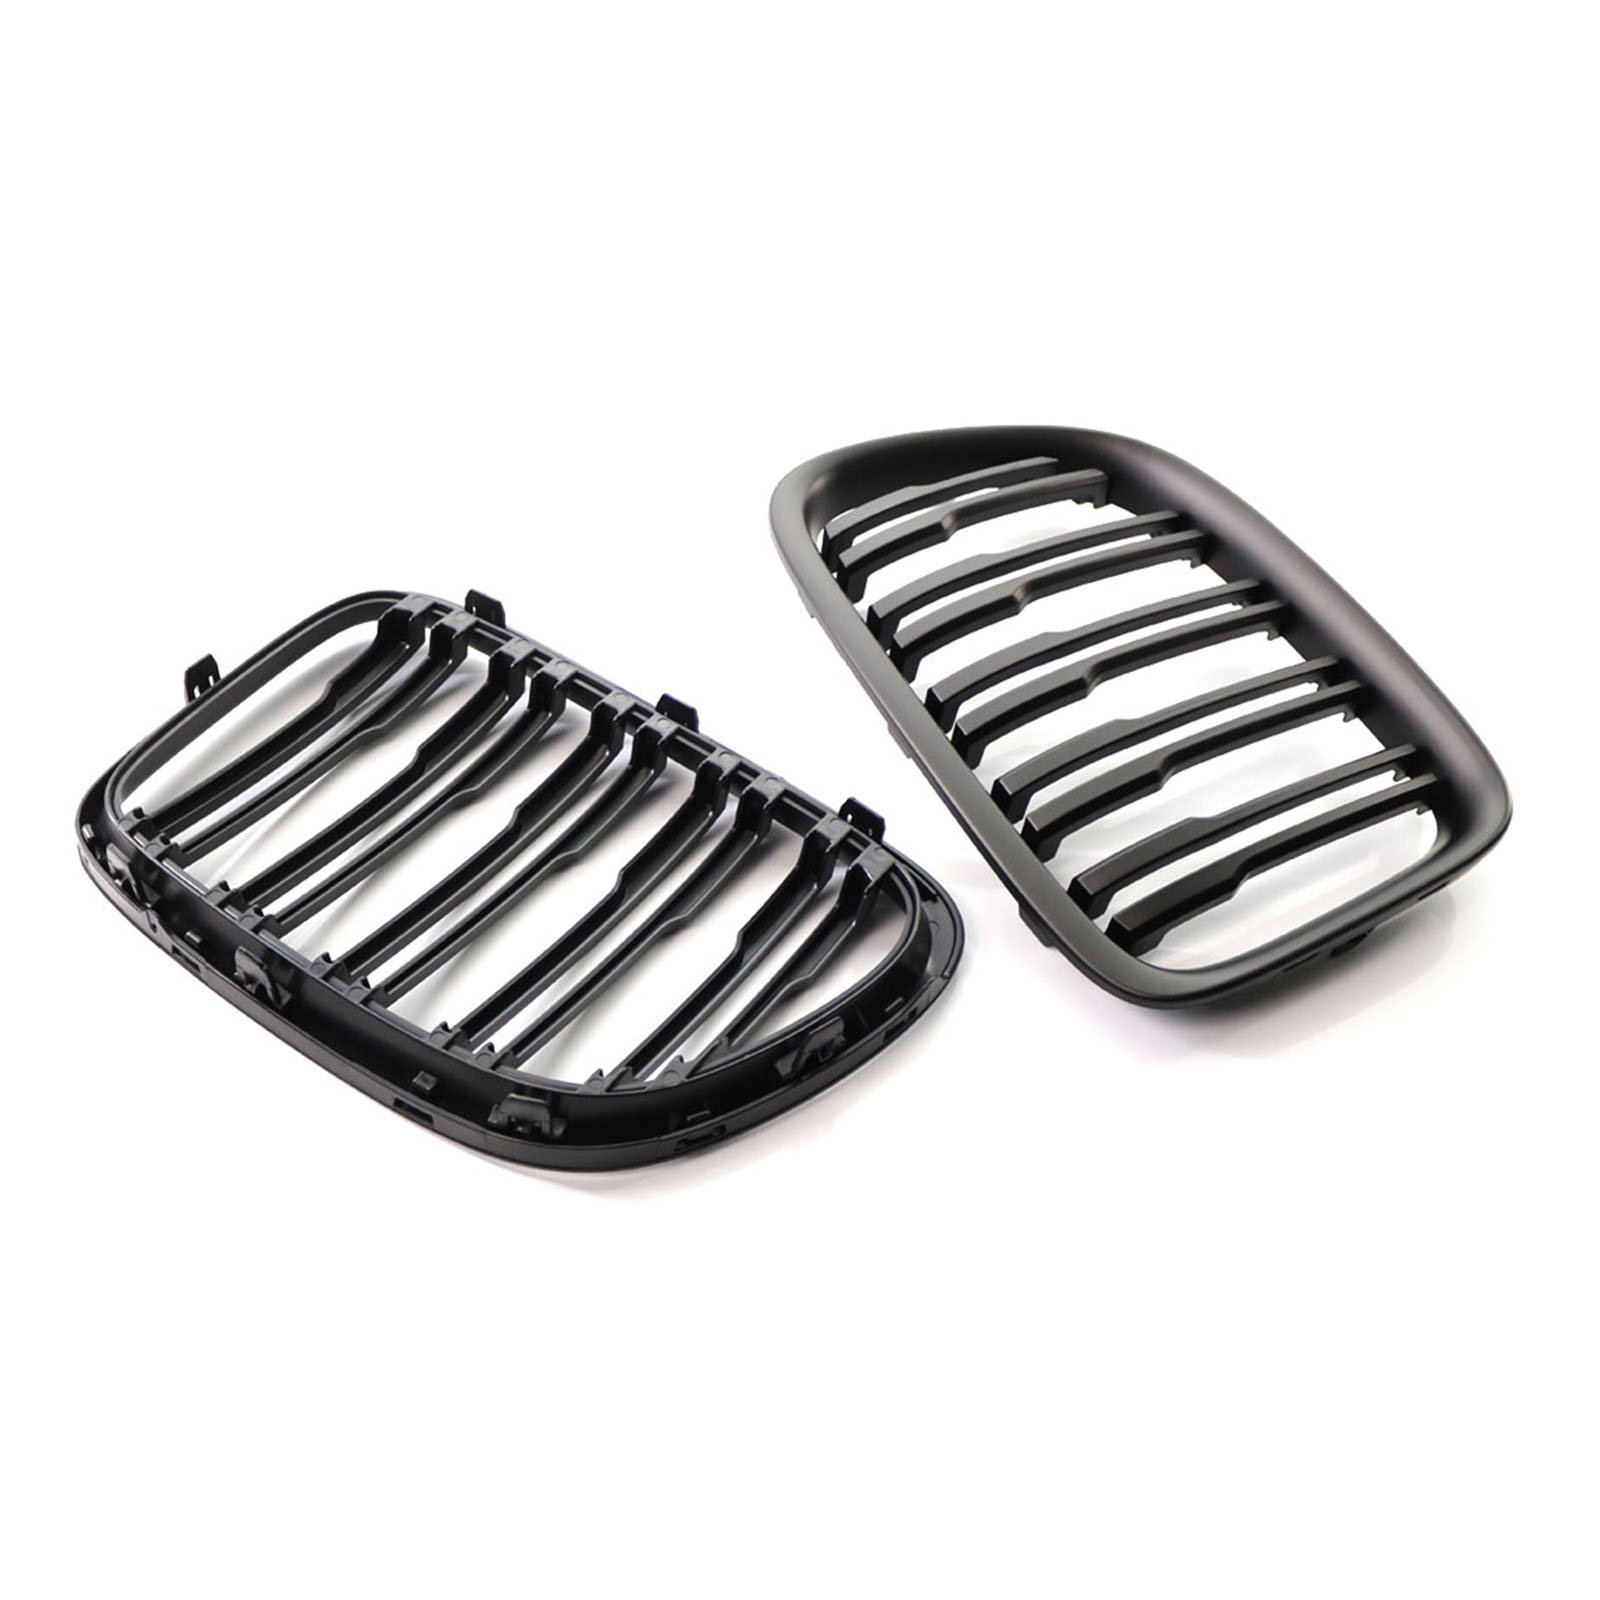 Grille Front for BMW E84 X1 18i 28i 2009 2012 2011 2015 Bumper Racing Matte